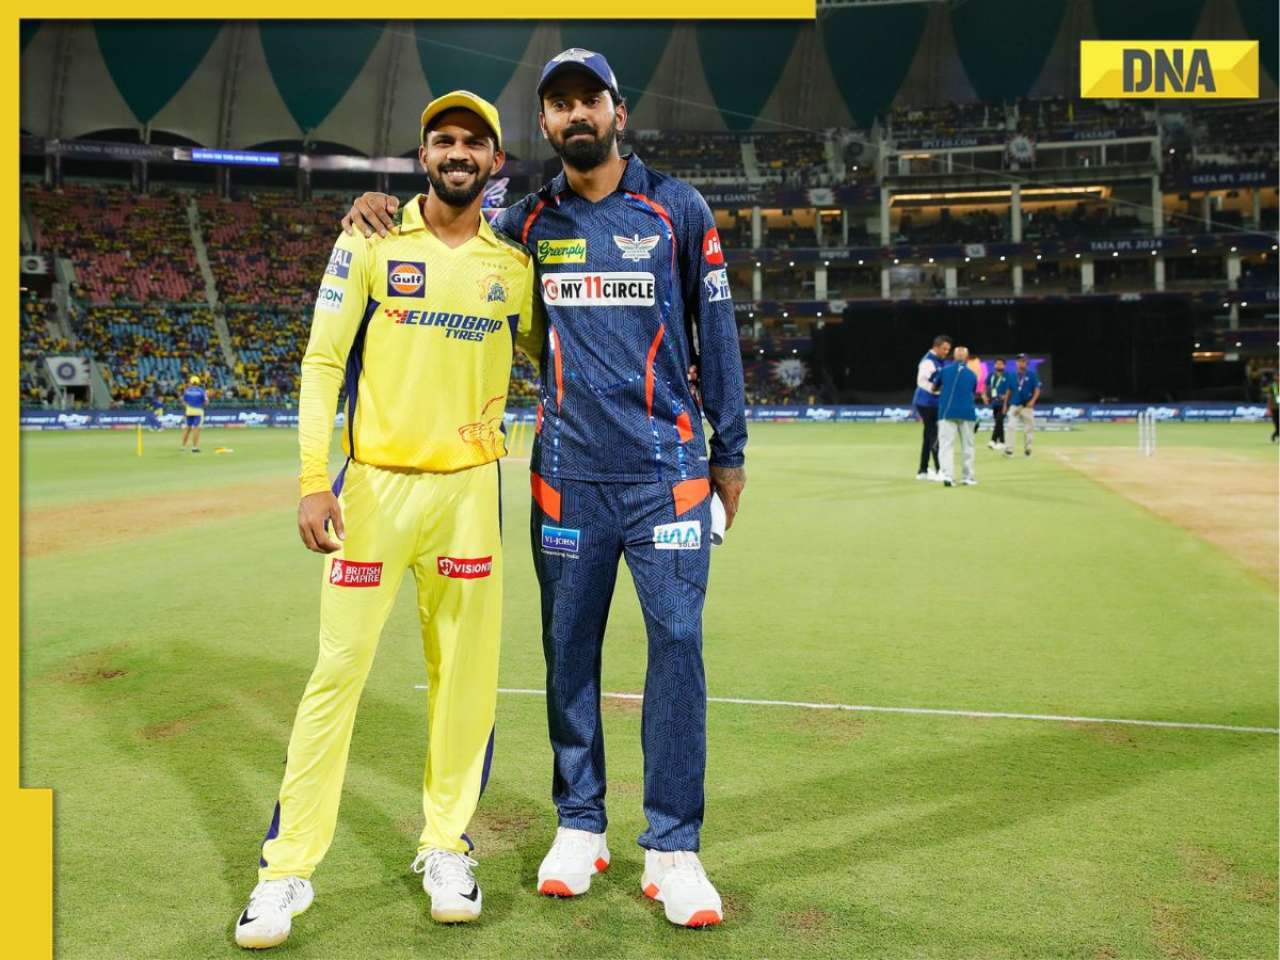 BCCI imposes heavy fines on KL Rahul, Ruturaj Gaikwad immediately after LSG vs CSK IPL match, here's why